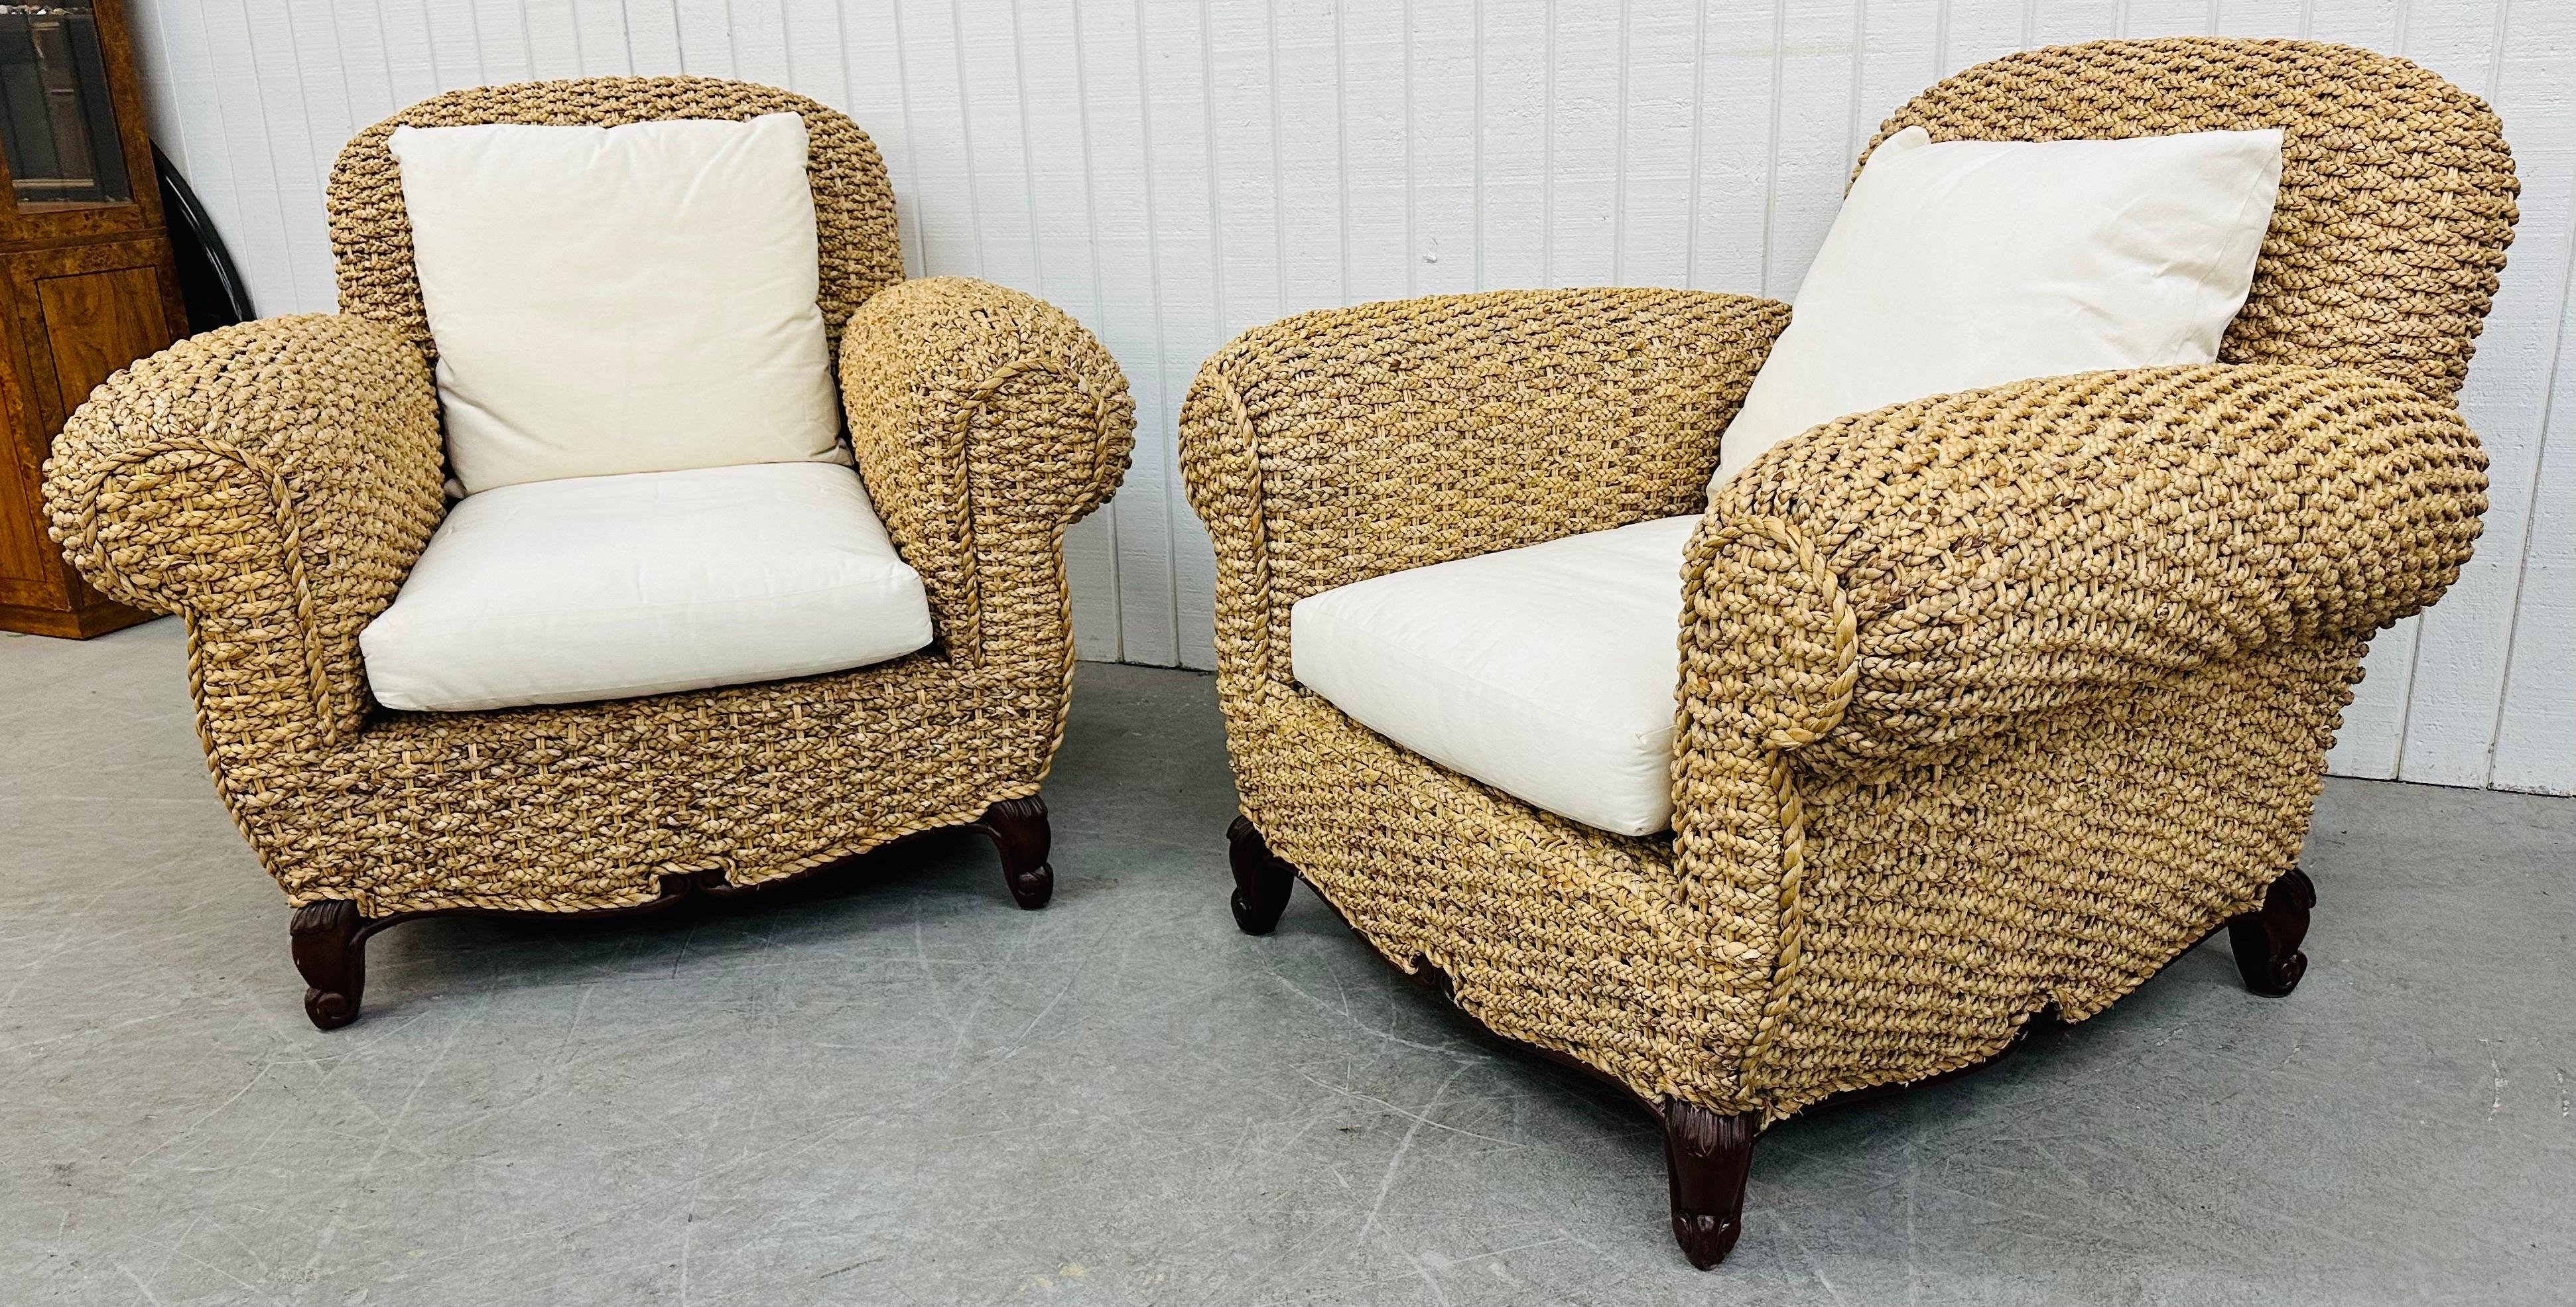 This listing is for a pair of vintage Ralph Lauren French Sisal Style Arm Chairs. Featuring a woven sisal style rope frame, french style wooden leg, white cushions, and a blue Ralph Lauren label. This is an exceptional combination of quality and